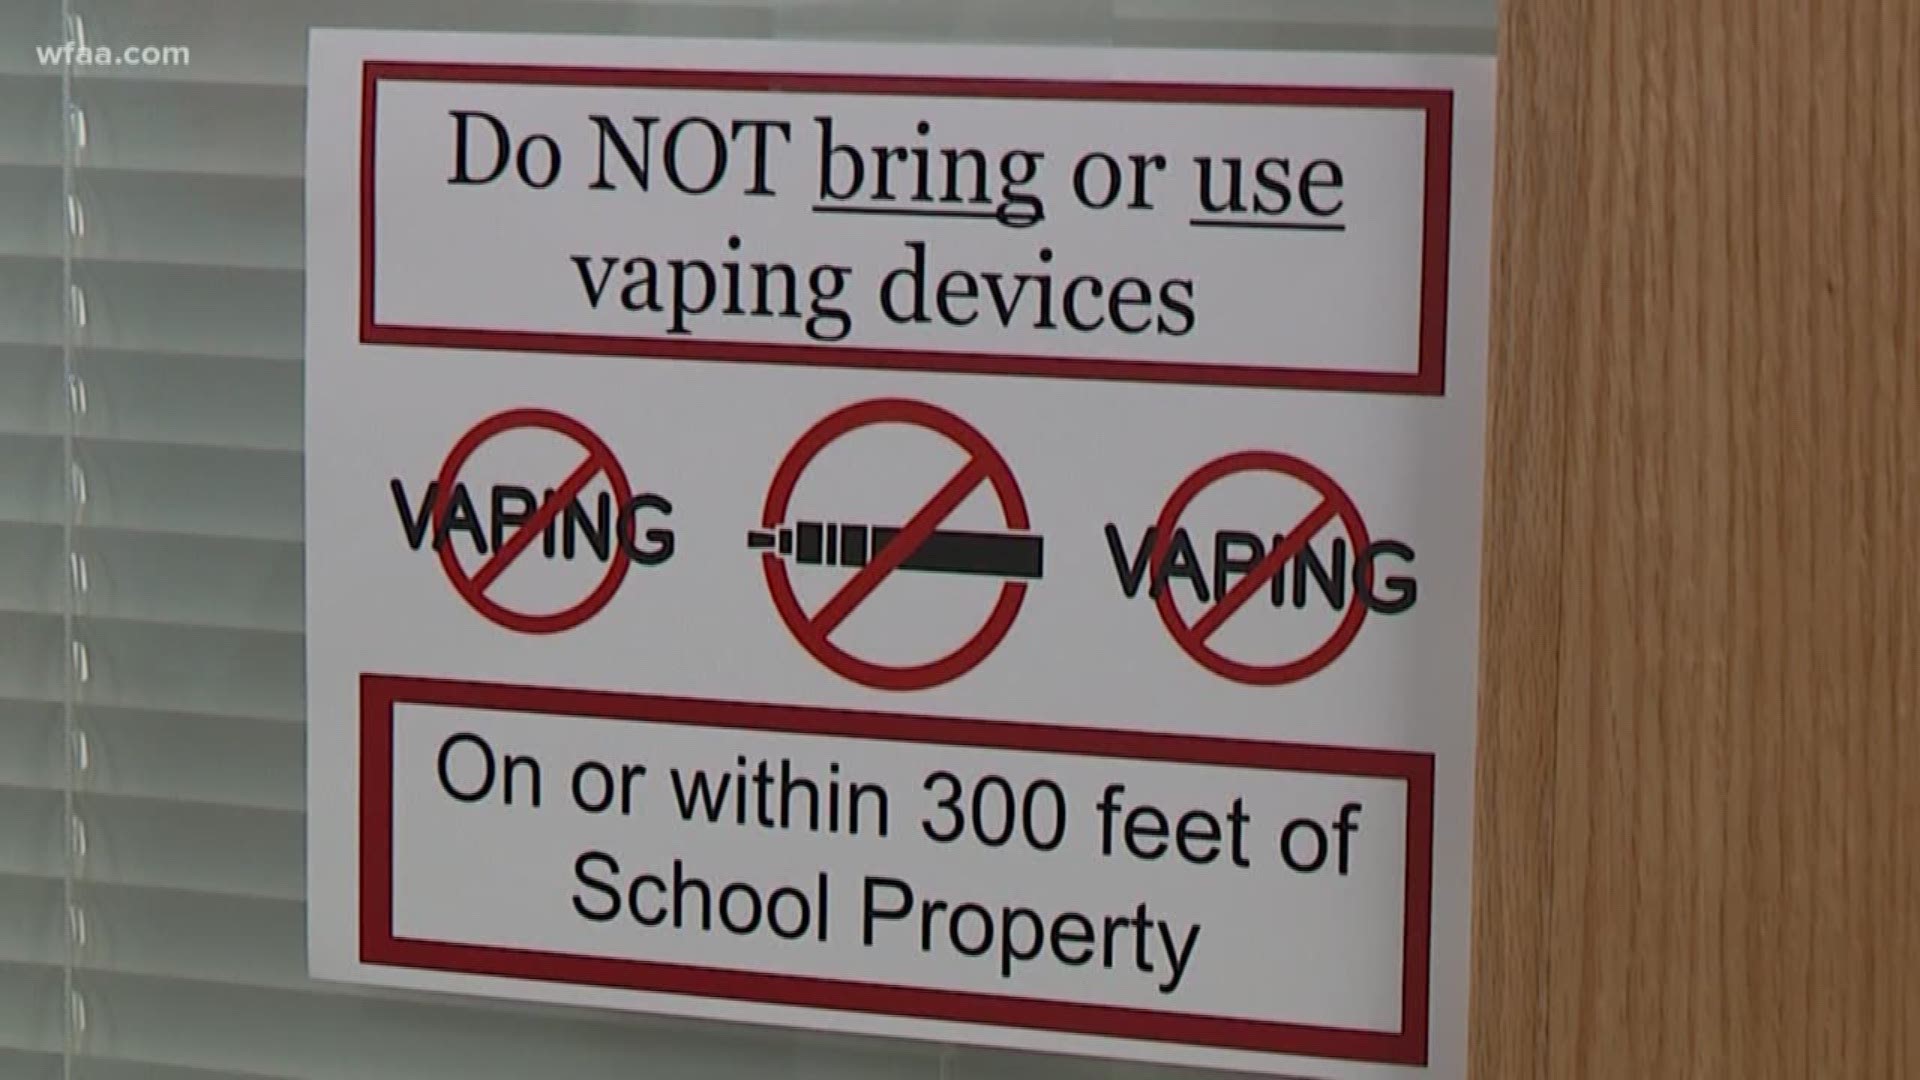 Vaping THC not only has a possible health setback, but it's also a quick way to get charged with a felony in Texas if you're a student. Richardson ISD is making students watch a nearly three-minute video that explains how vaping an illegal substance on campus could result in jail time.